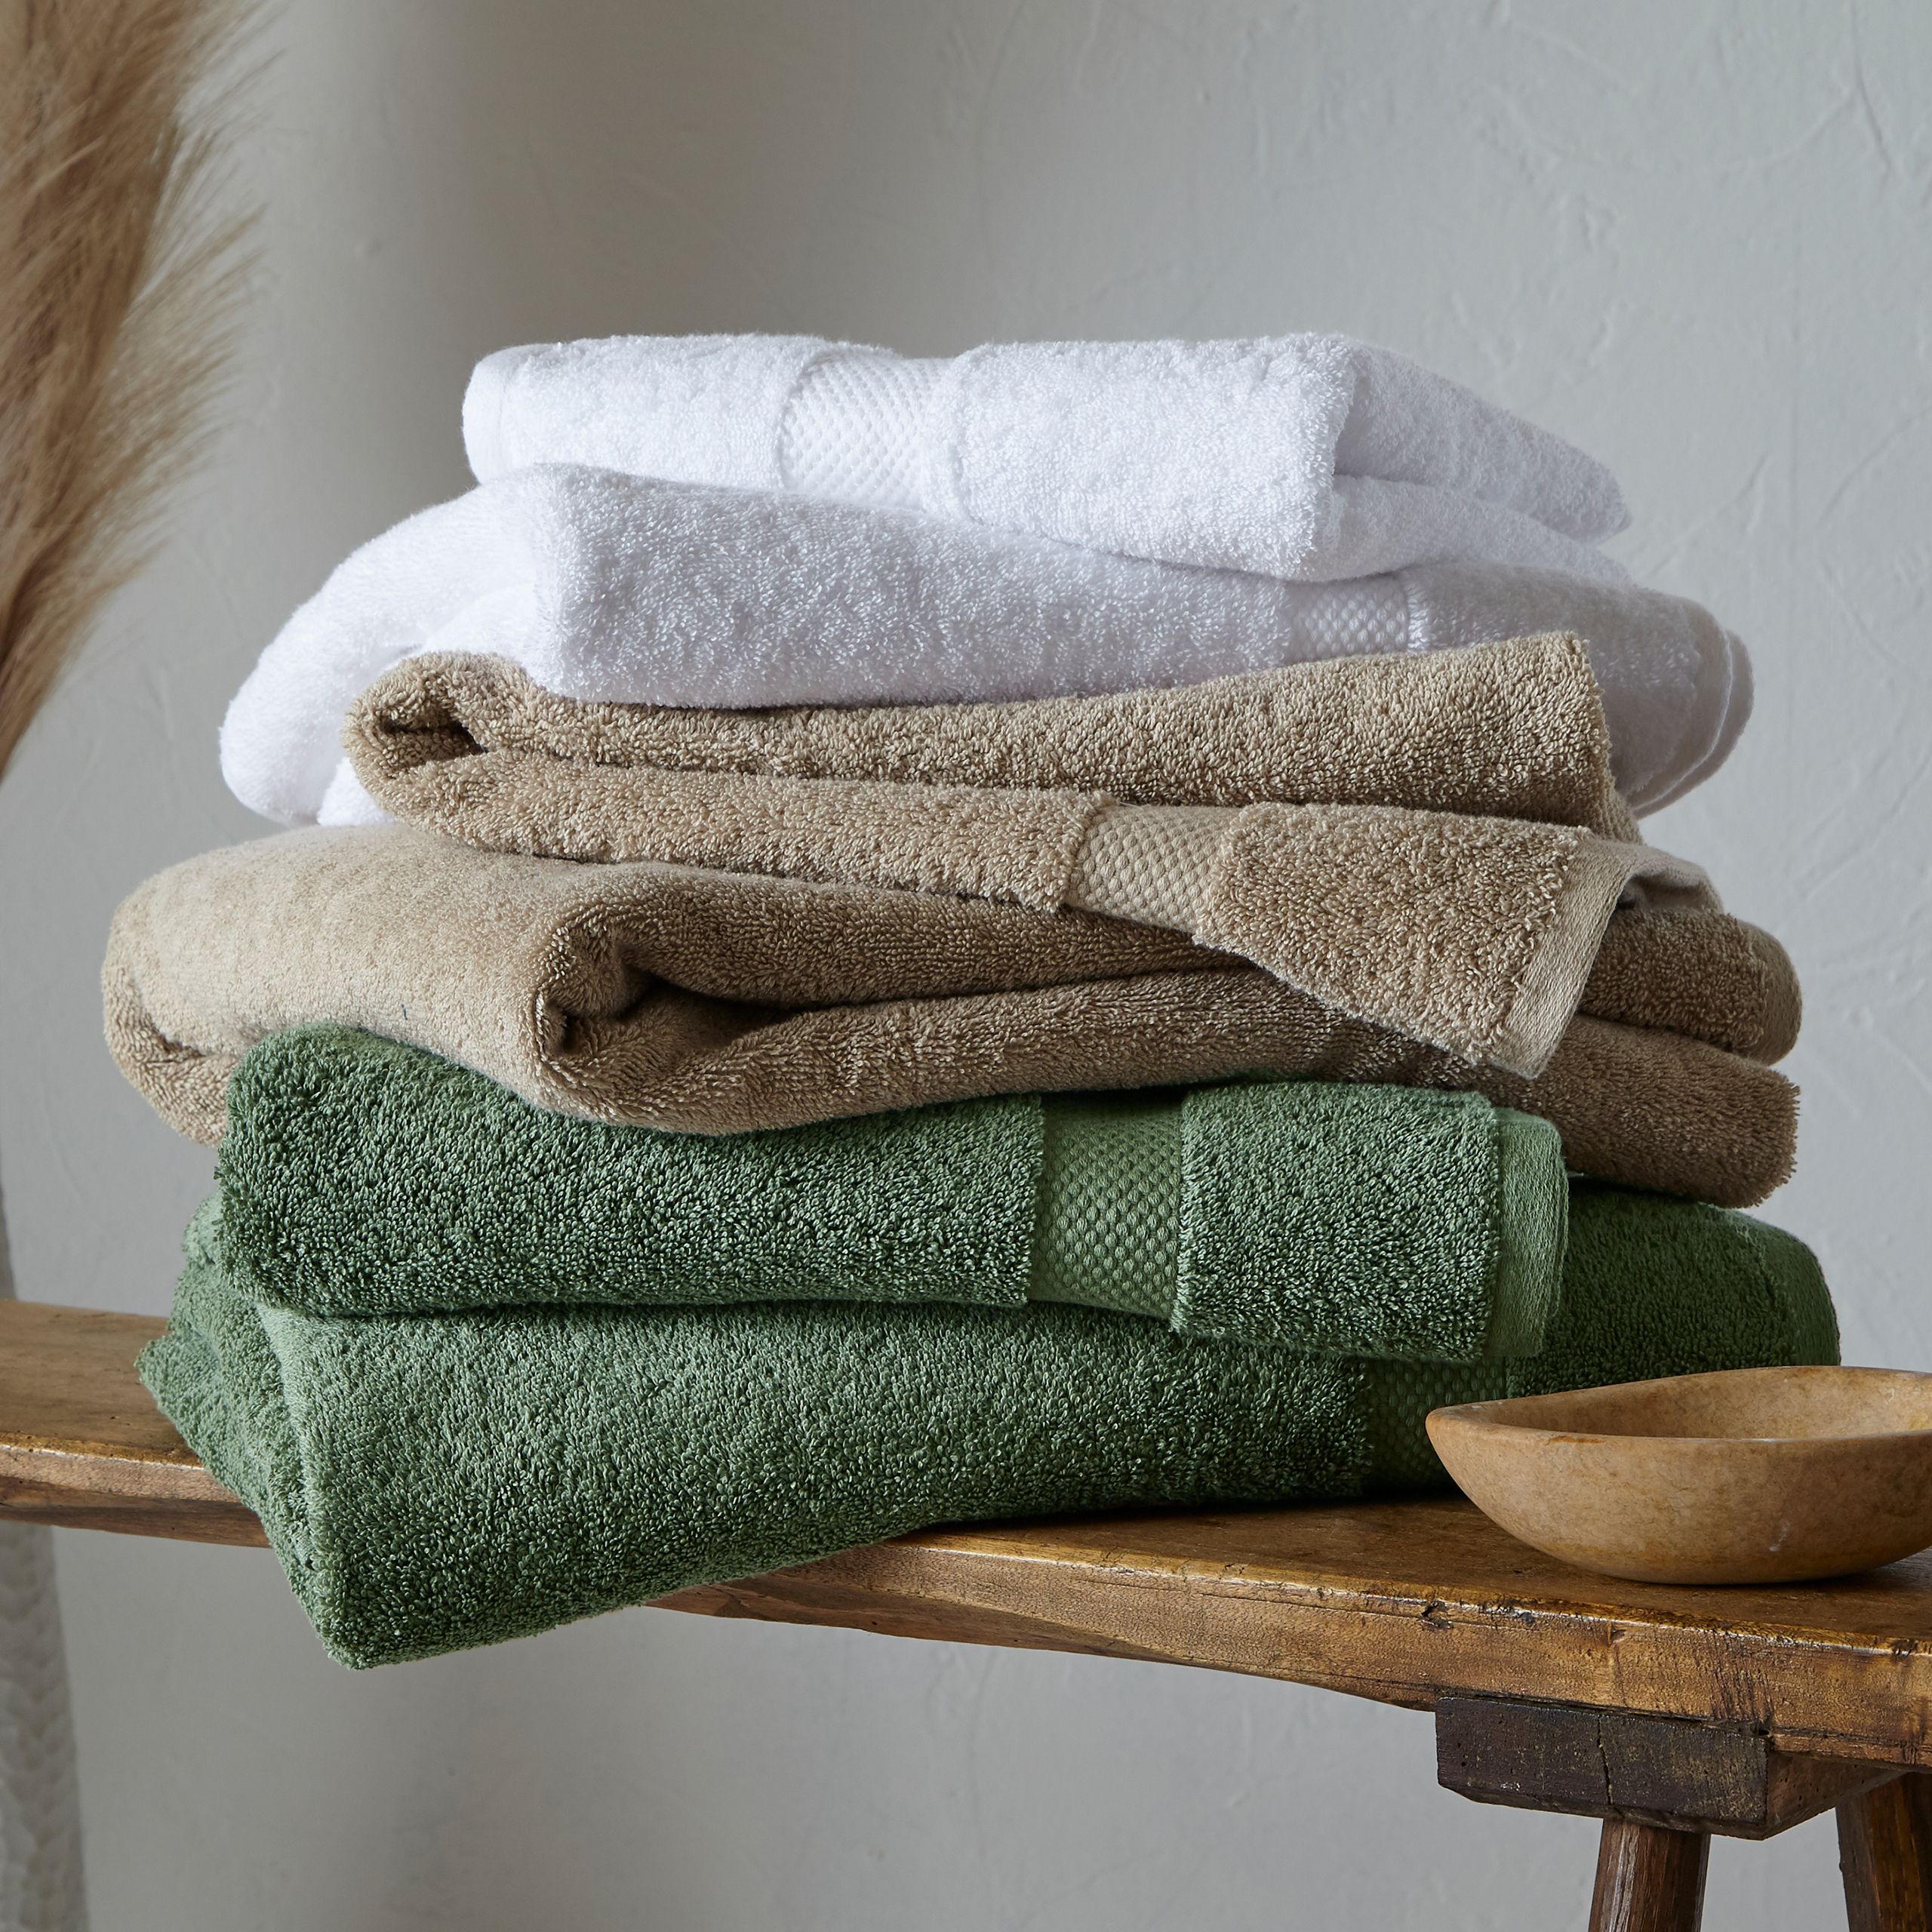 The Linen Yard LOFT collection of face cloths are a must have for your home. They are designed to be super absorbent and are ultra-soft. Made from a 100% plush combed cotton for a relaxed everyday feel. Perfect enveloping heavyweight towels with 650 grams per square metre. The basket weave band is a quality design feature that gives LOFT towels a stylish effortless signature look. In multiple soothing shades, create an air of calm in your washroom and always have super softness on hand.